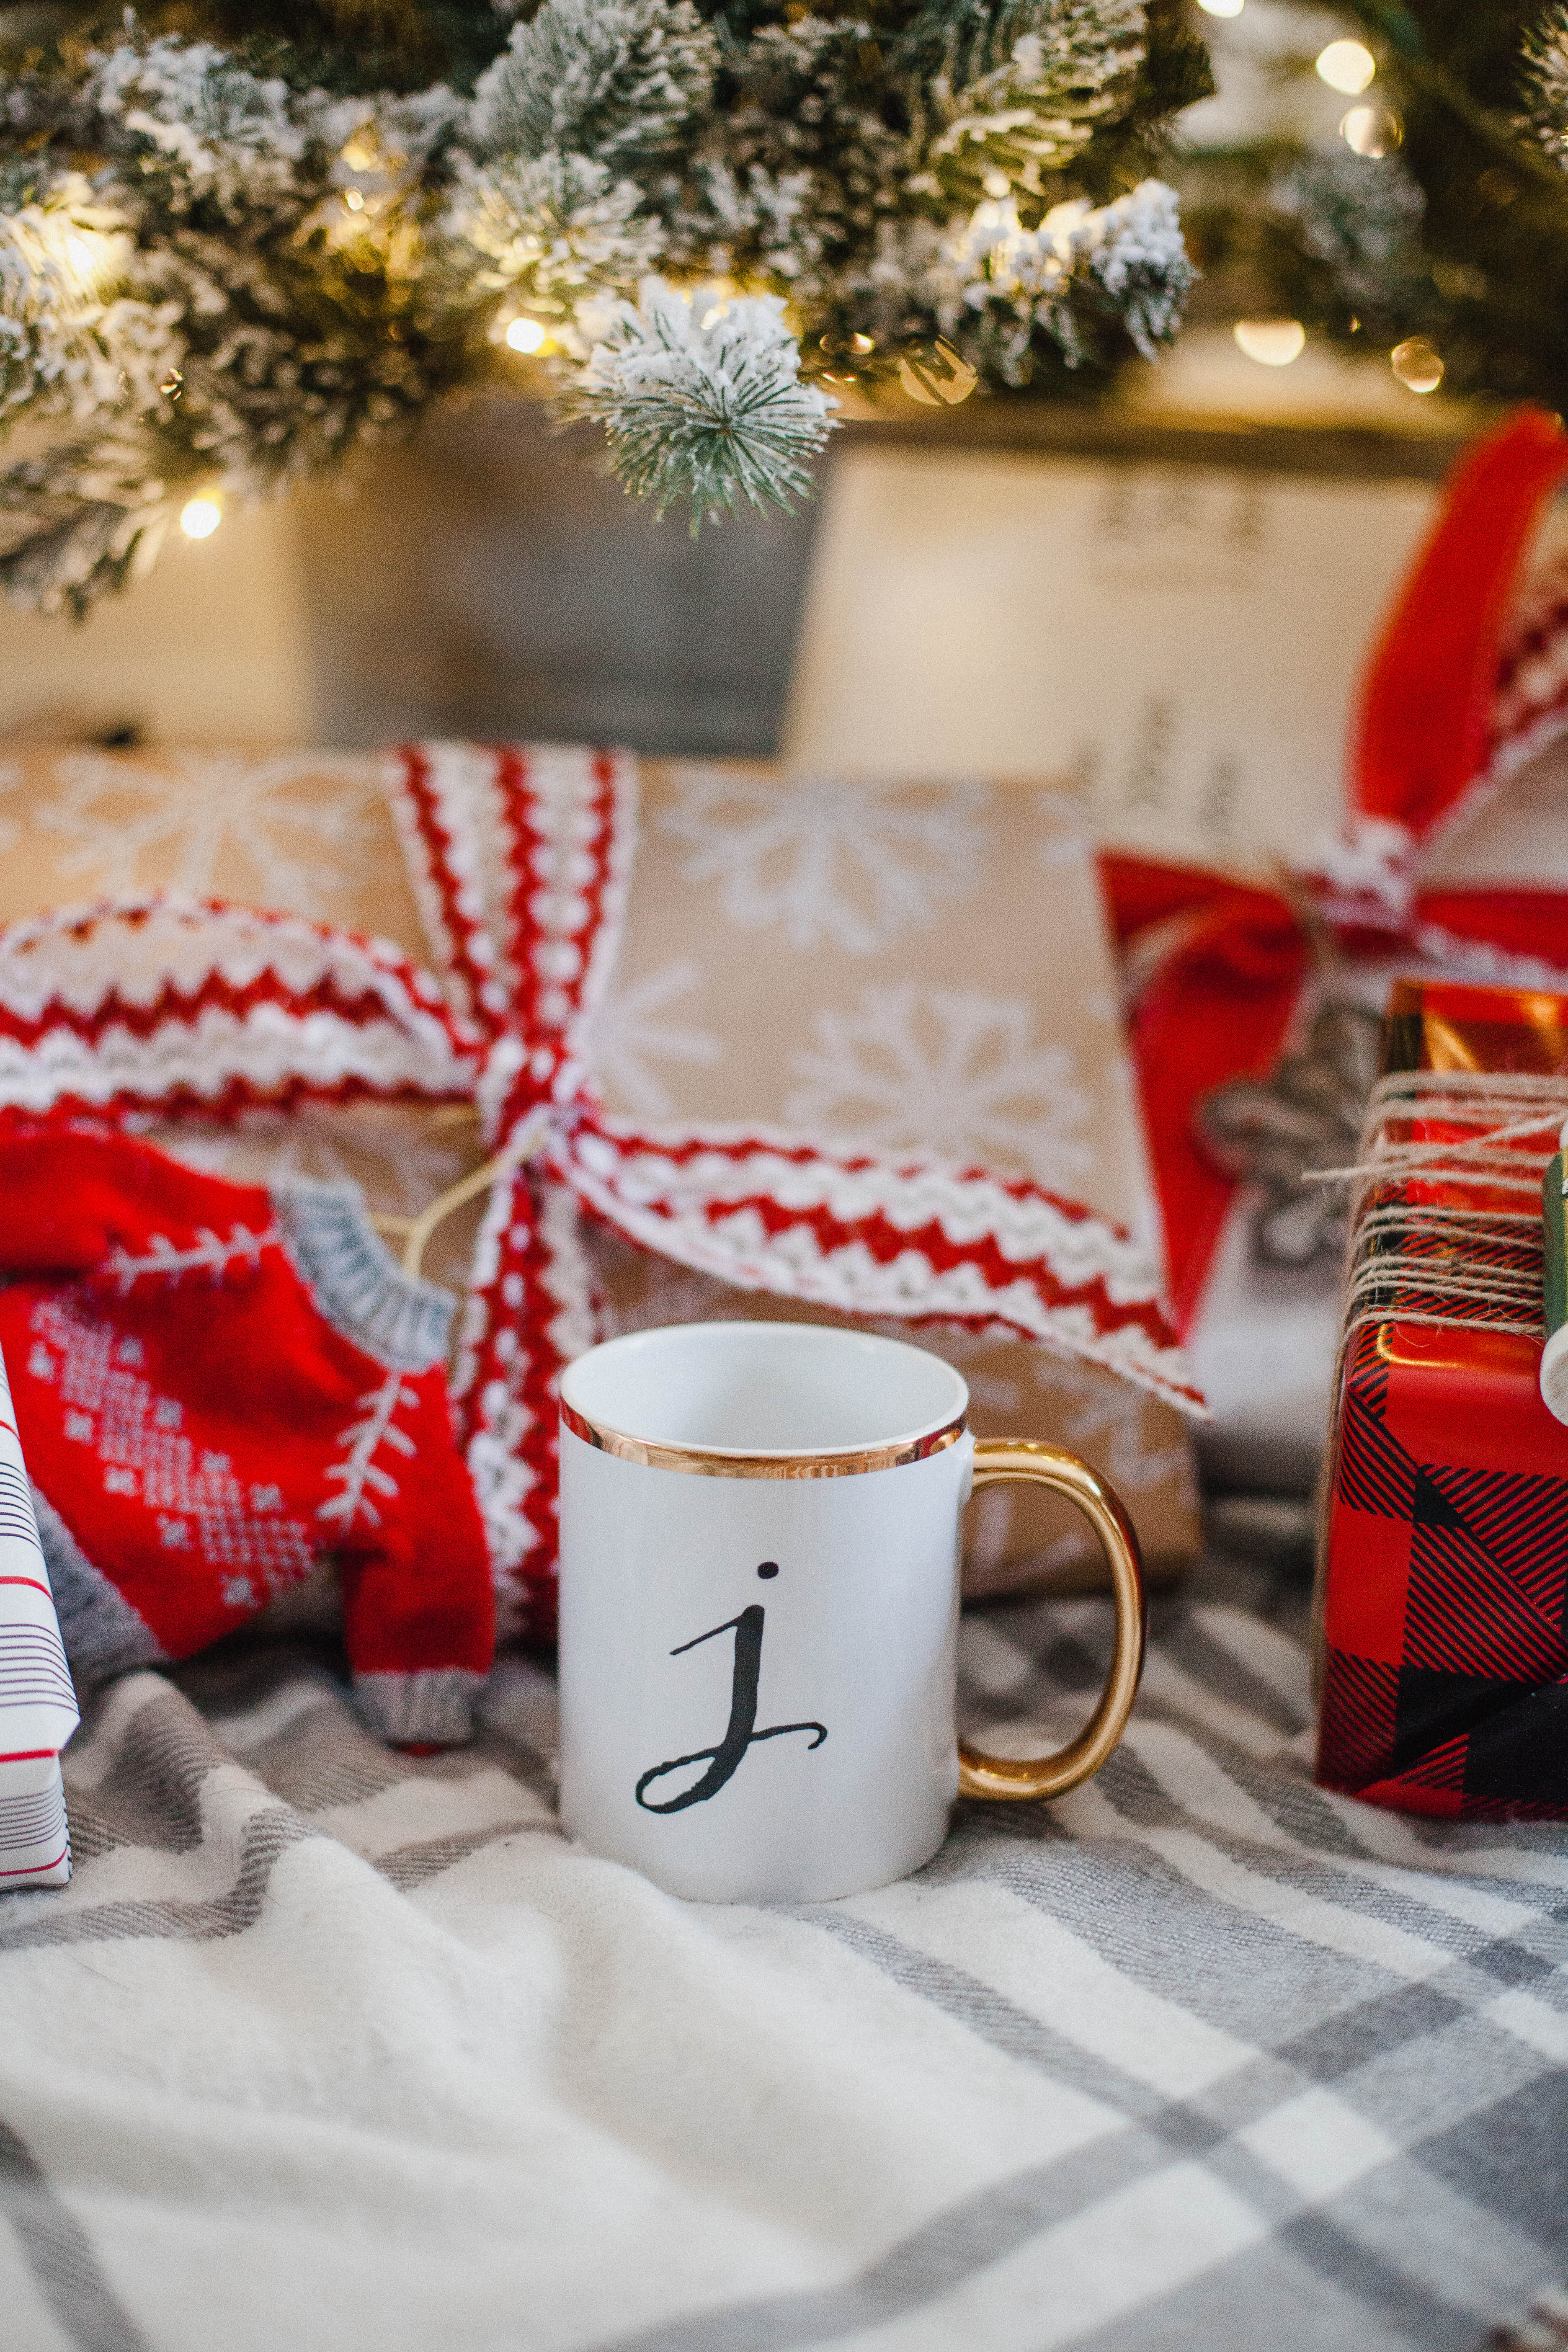 Life and style blogger Lauren McBride shares the Best Personalized Holiday Gifts for the season and how to go above and beyond standard personalization!